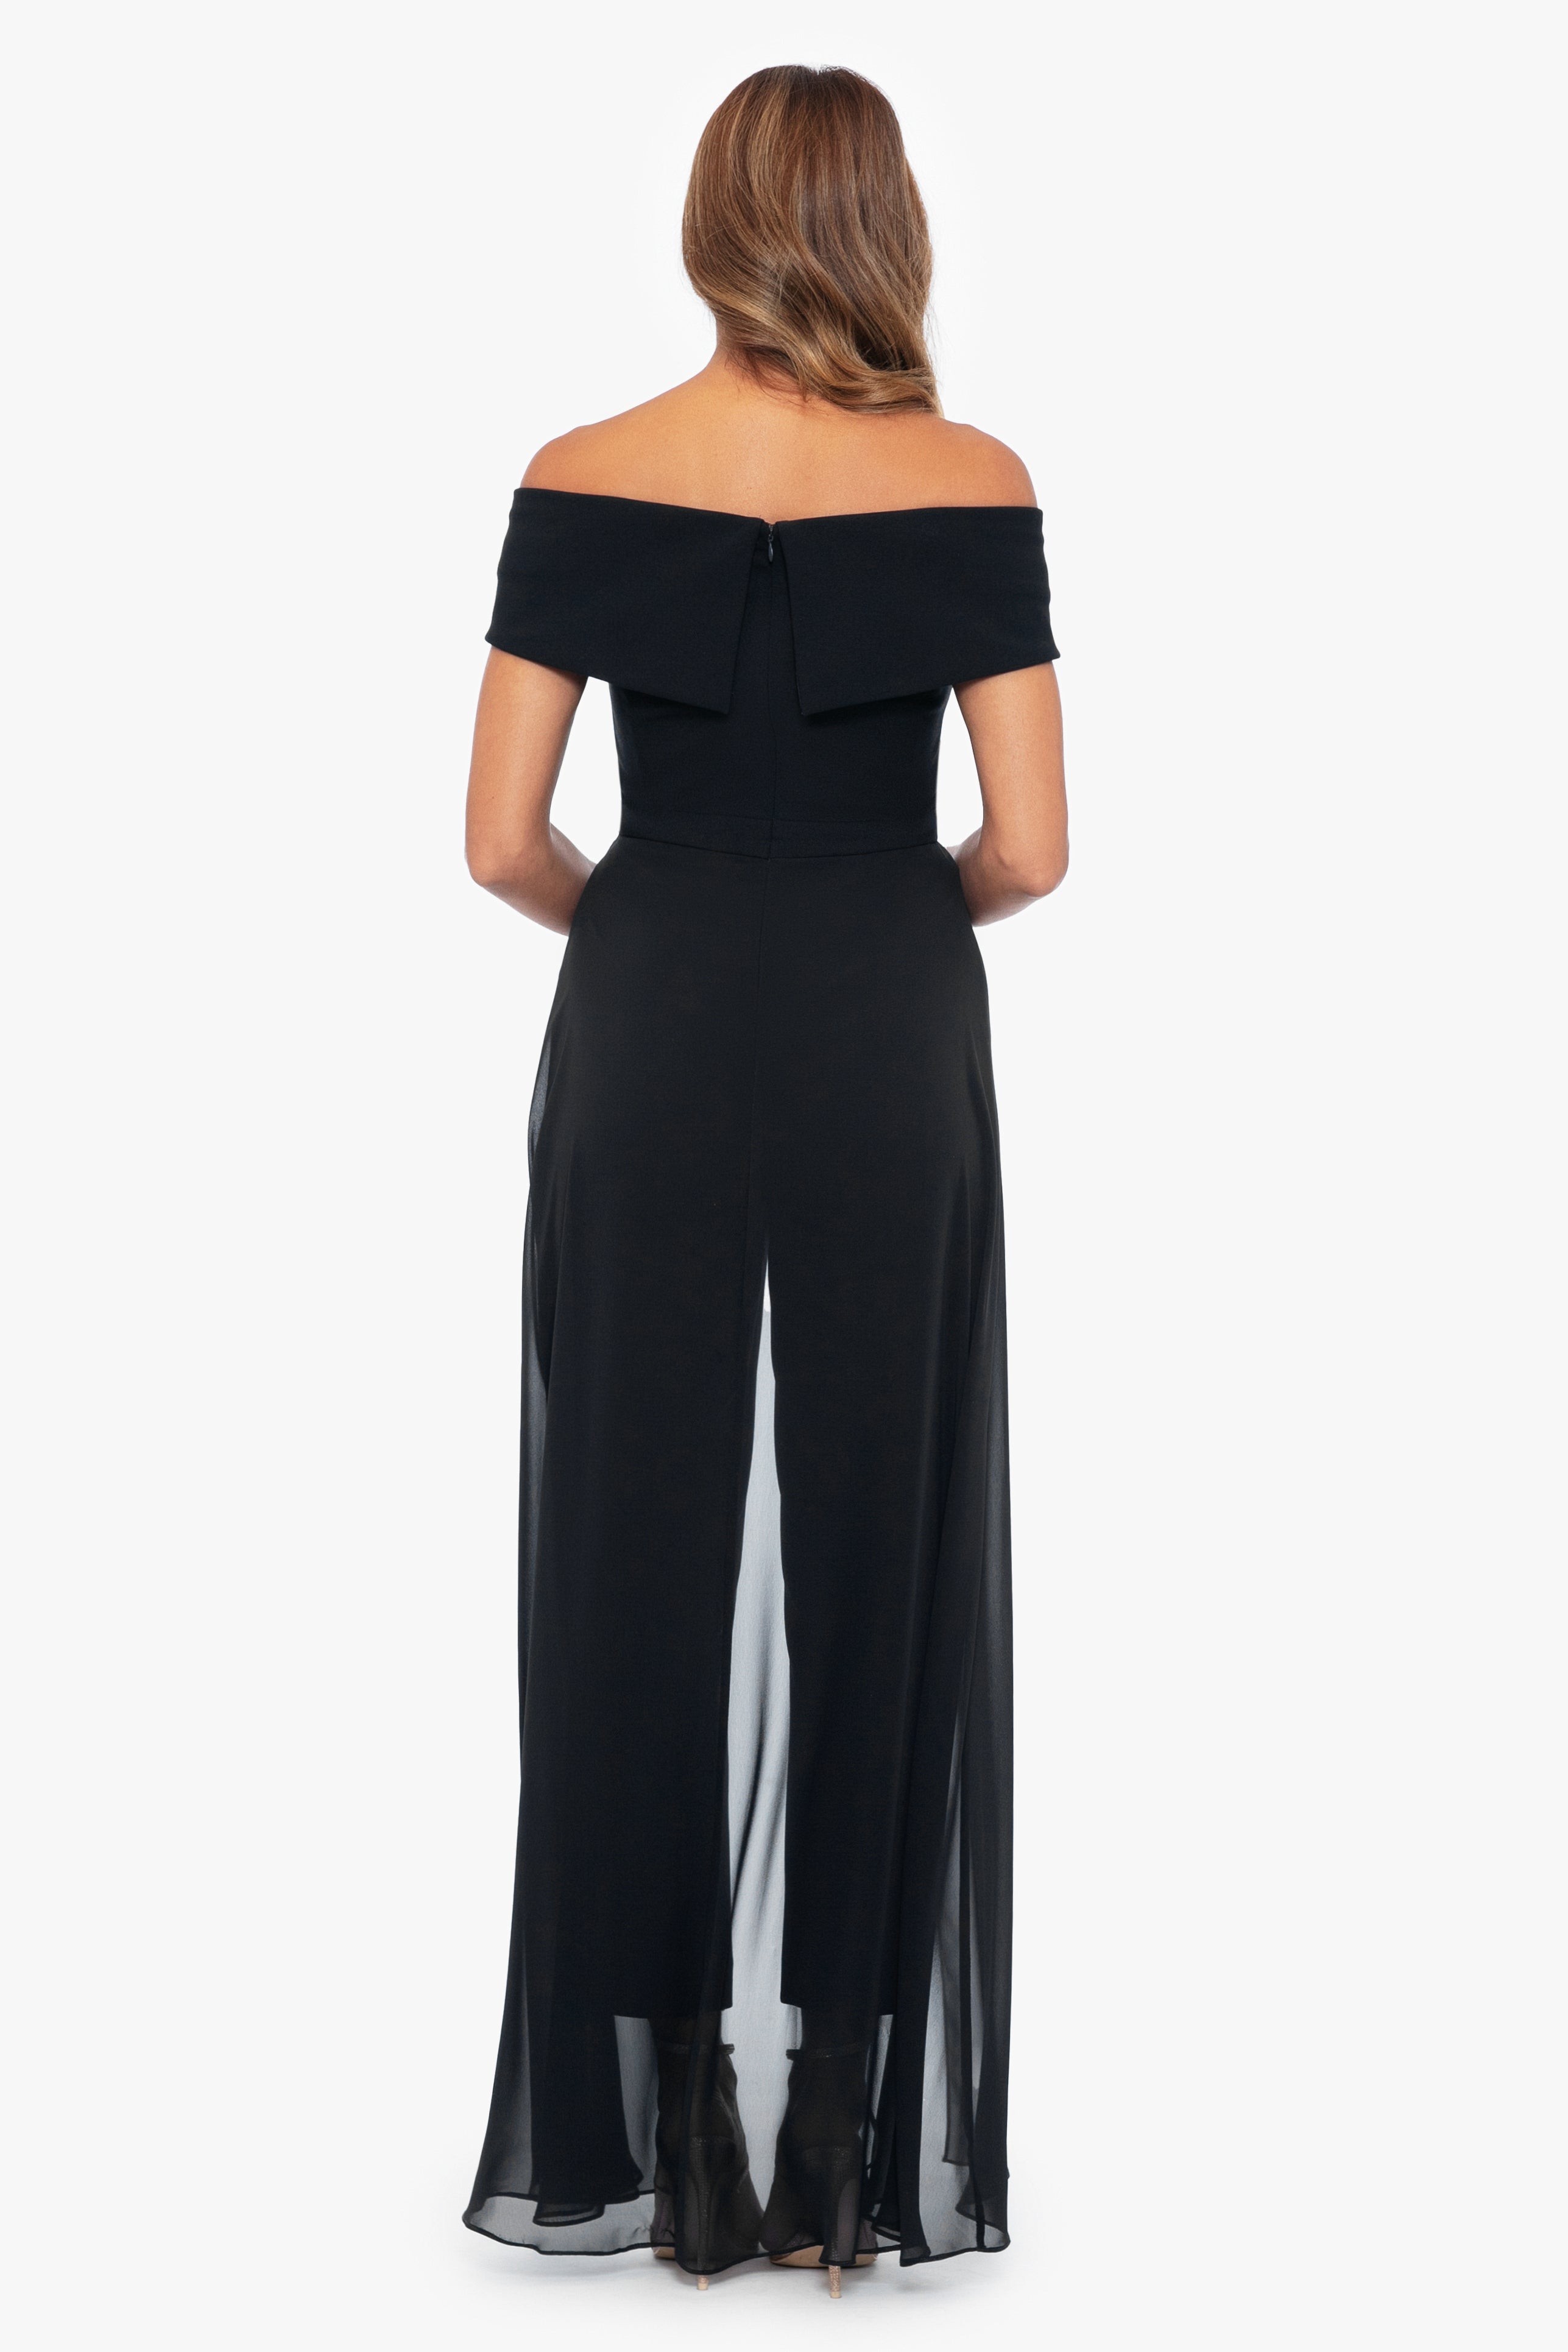 Day to Night Dresses – Xscape Evenings